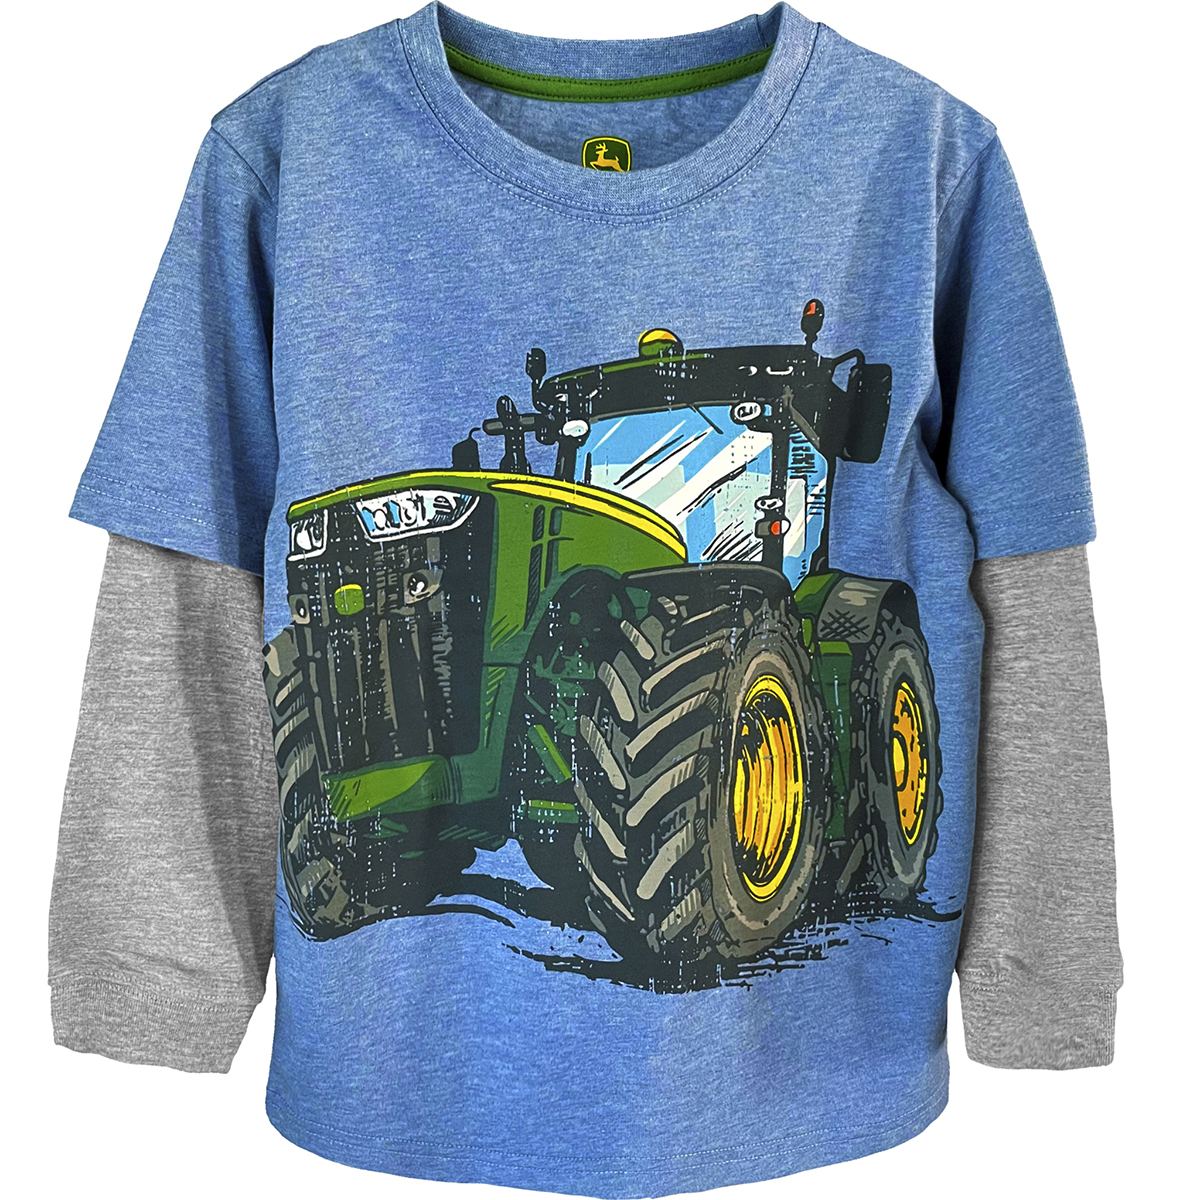 Bold Tractor Long Sleeve T-Shirt